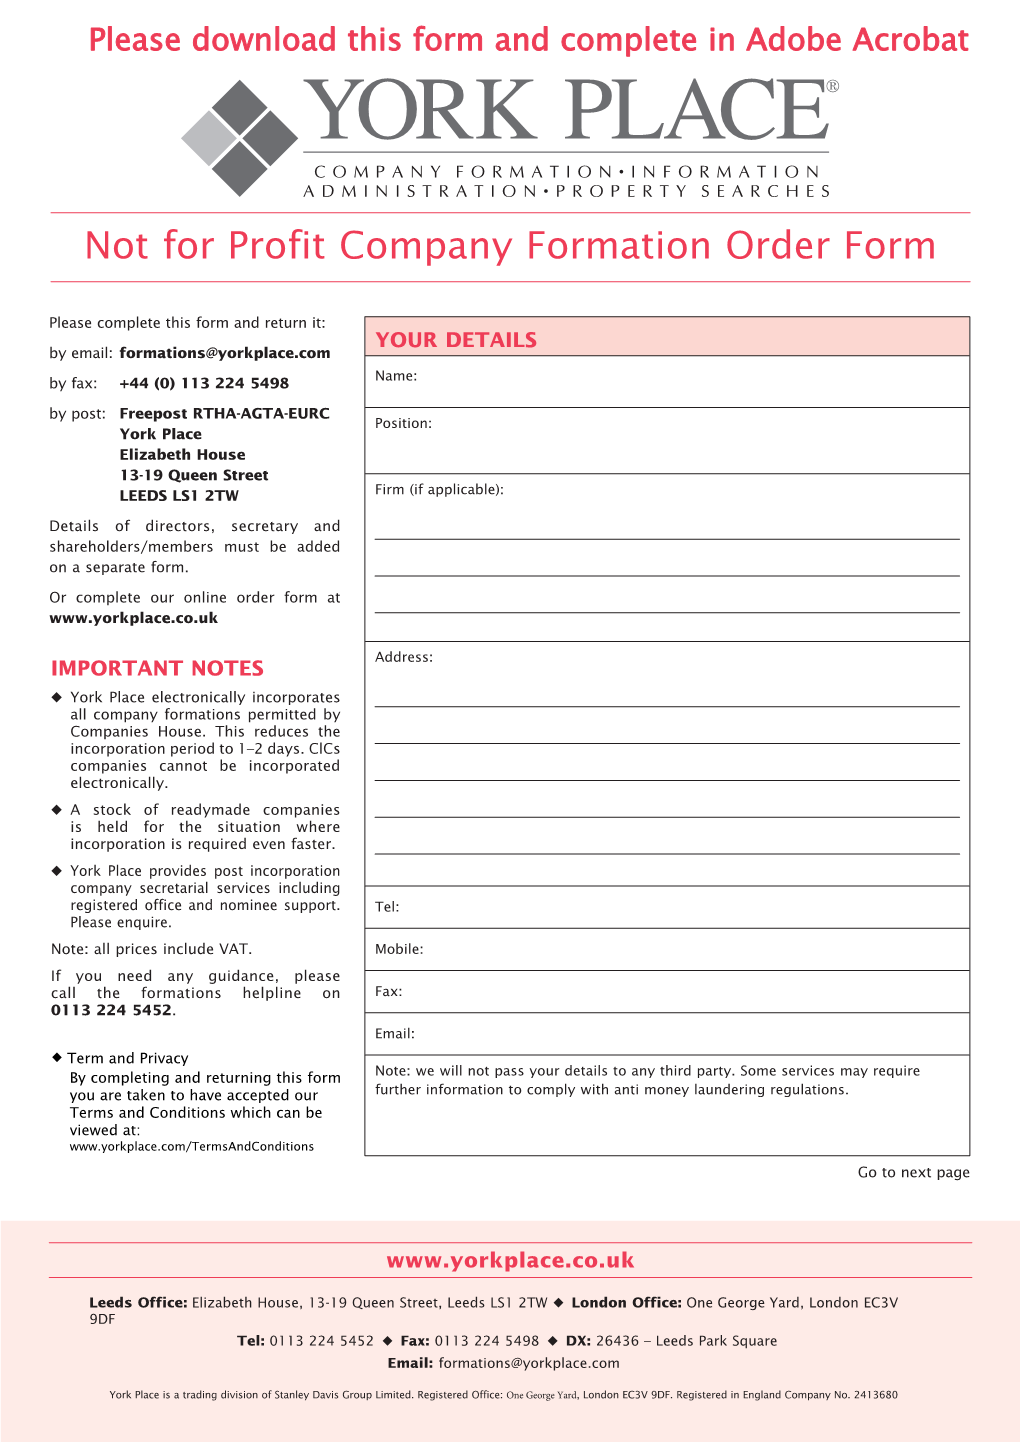 Not for Profit Company Formation Order Form